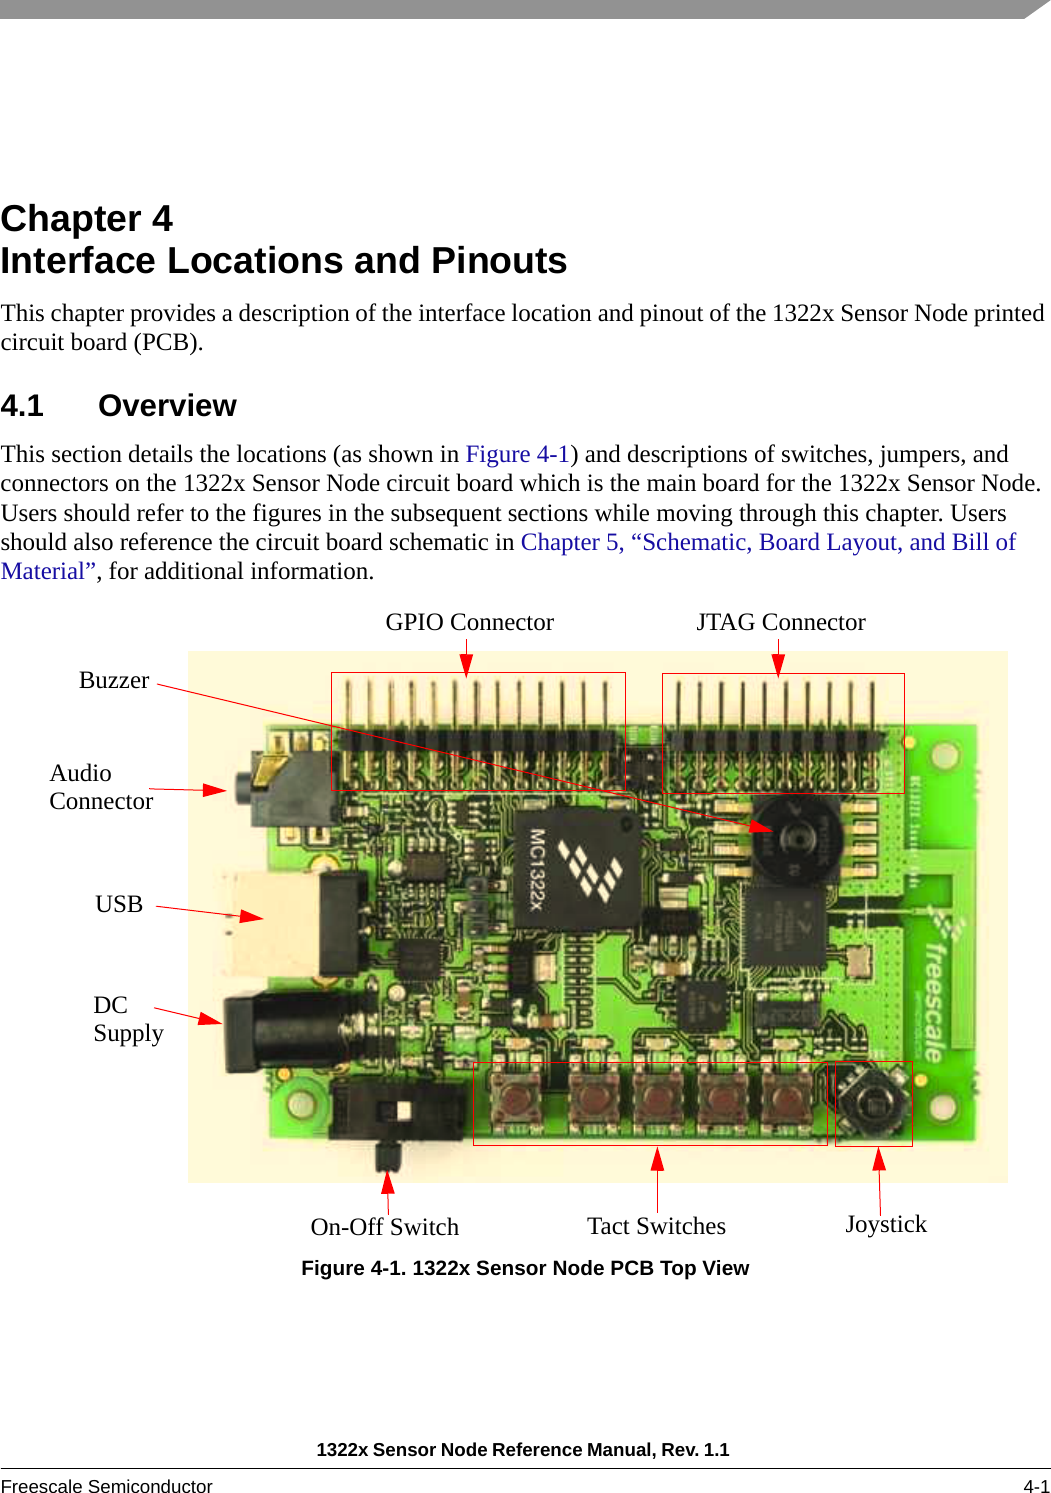 1322x Sensor Node Reference Manual, Rev. 1.1 Freescale Semiconductor 4-1Chapter 4  Interface Locations and PinoutsThis chapter provides a description of the interface location and pinout of the 1322x Sensor Node printed circuit board (PCB). 4.1 OverviewThis section details the locations (as shown in Figure 4-1) and descriptions of switches, jumpers, and connectors on the 1322x Sensor Node circuit board which is the main board for the 1322x Sensor Node. Users should refer to the figures in the subsequent sections while moving through this chapter. Users should also reference the circuit board schematic in Chapter 5, “Schematic, Board Layout, and Bill of Material”, for additional information.Figure 4-1. 1322x Sensor Node PCB Top ViewTact SwitchesOn-Off SwitchJTAG ConnectorGPIO ConnectorDCSupplyJoystickAudio ConnectorBuzzerUSB